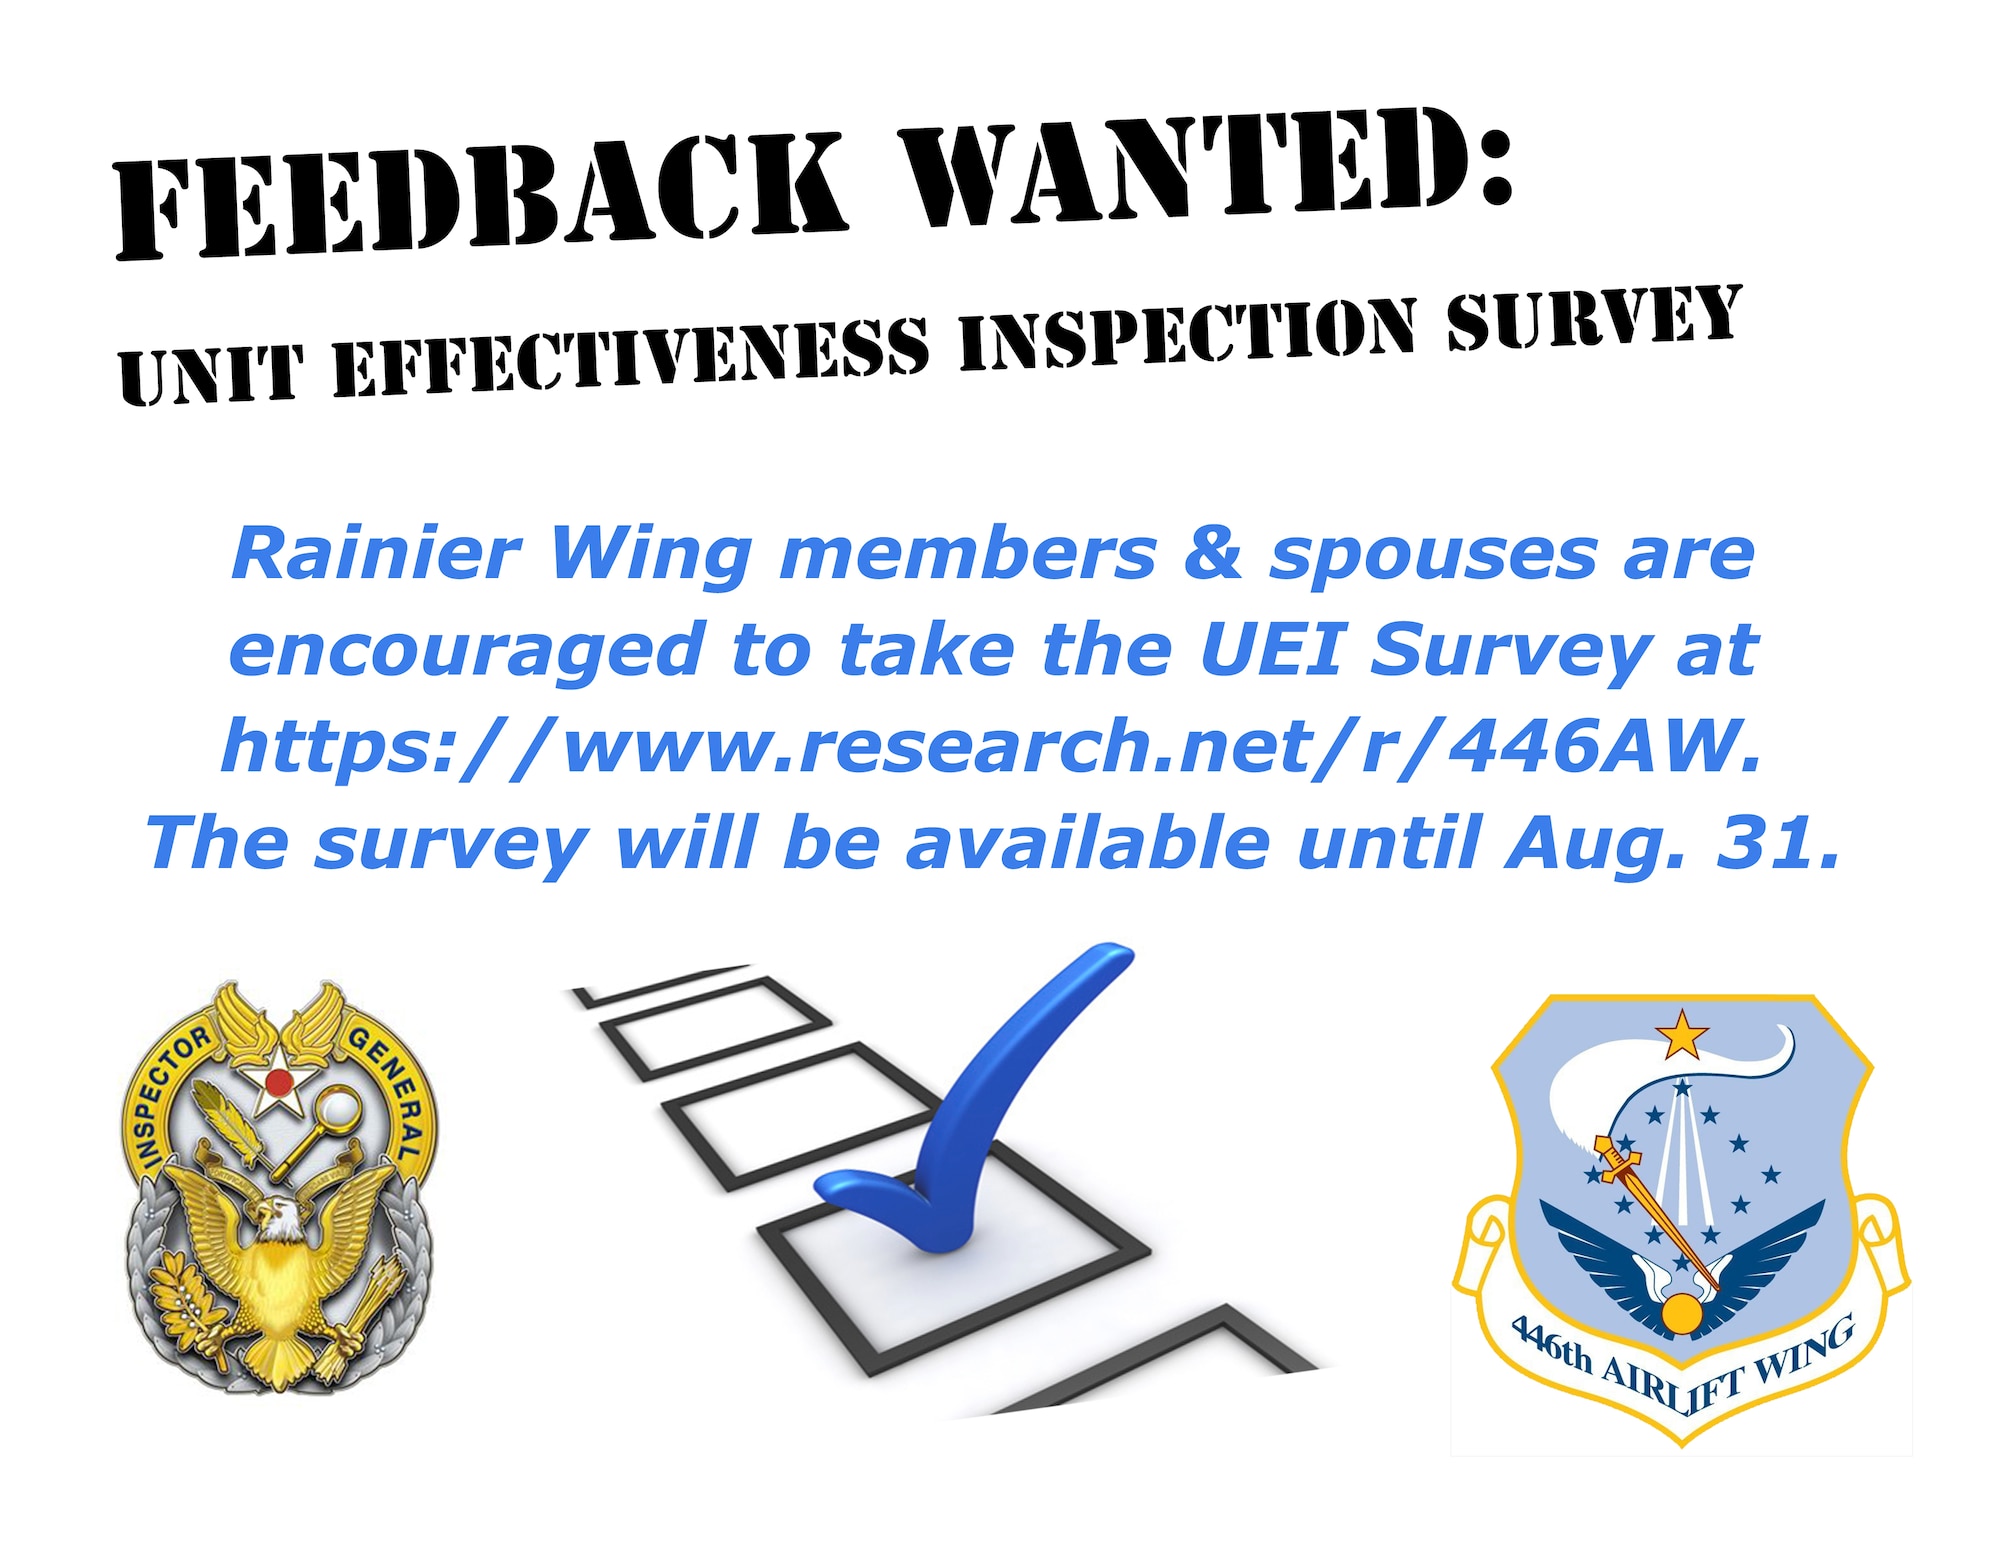 The 446th ‘Rainier’ Airlift Wing is currently undergoing a Unit Effectiveness Inspection which will culminate in a Capstone event during the December Unit Training Assembly. As part of the inspection, Rainier Wing members and their spouses are encouraged to take the UEI Survey at https://www.research.net/r/446AW. The survey will be available until Aug. 31. 
